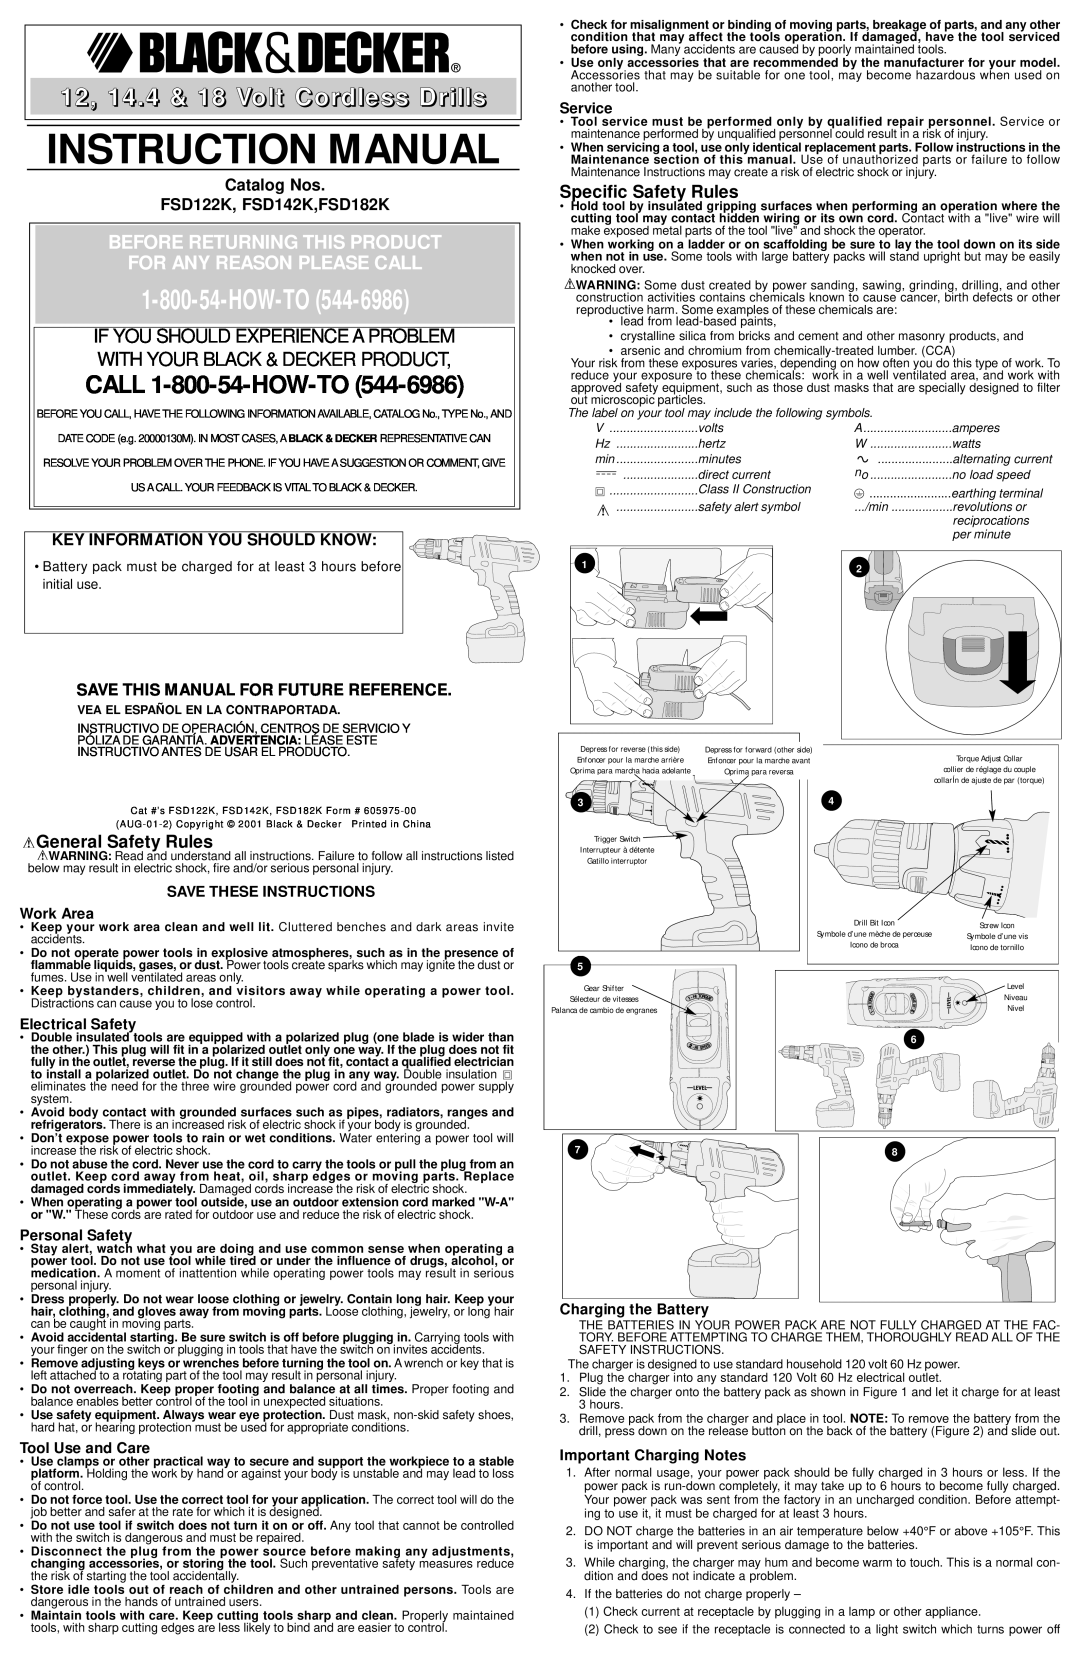 Black & Decker FSD142K instruction manual Key Information You Should Know, Save This Manual For Future Reference, Service 